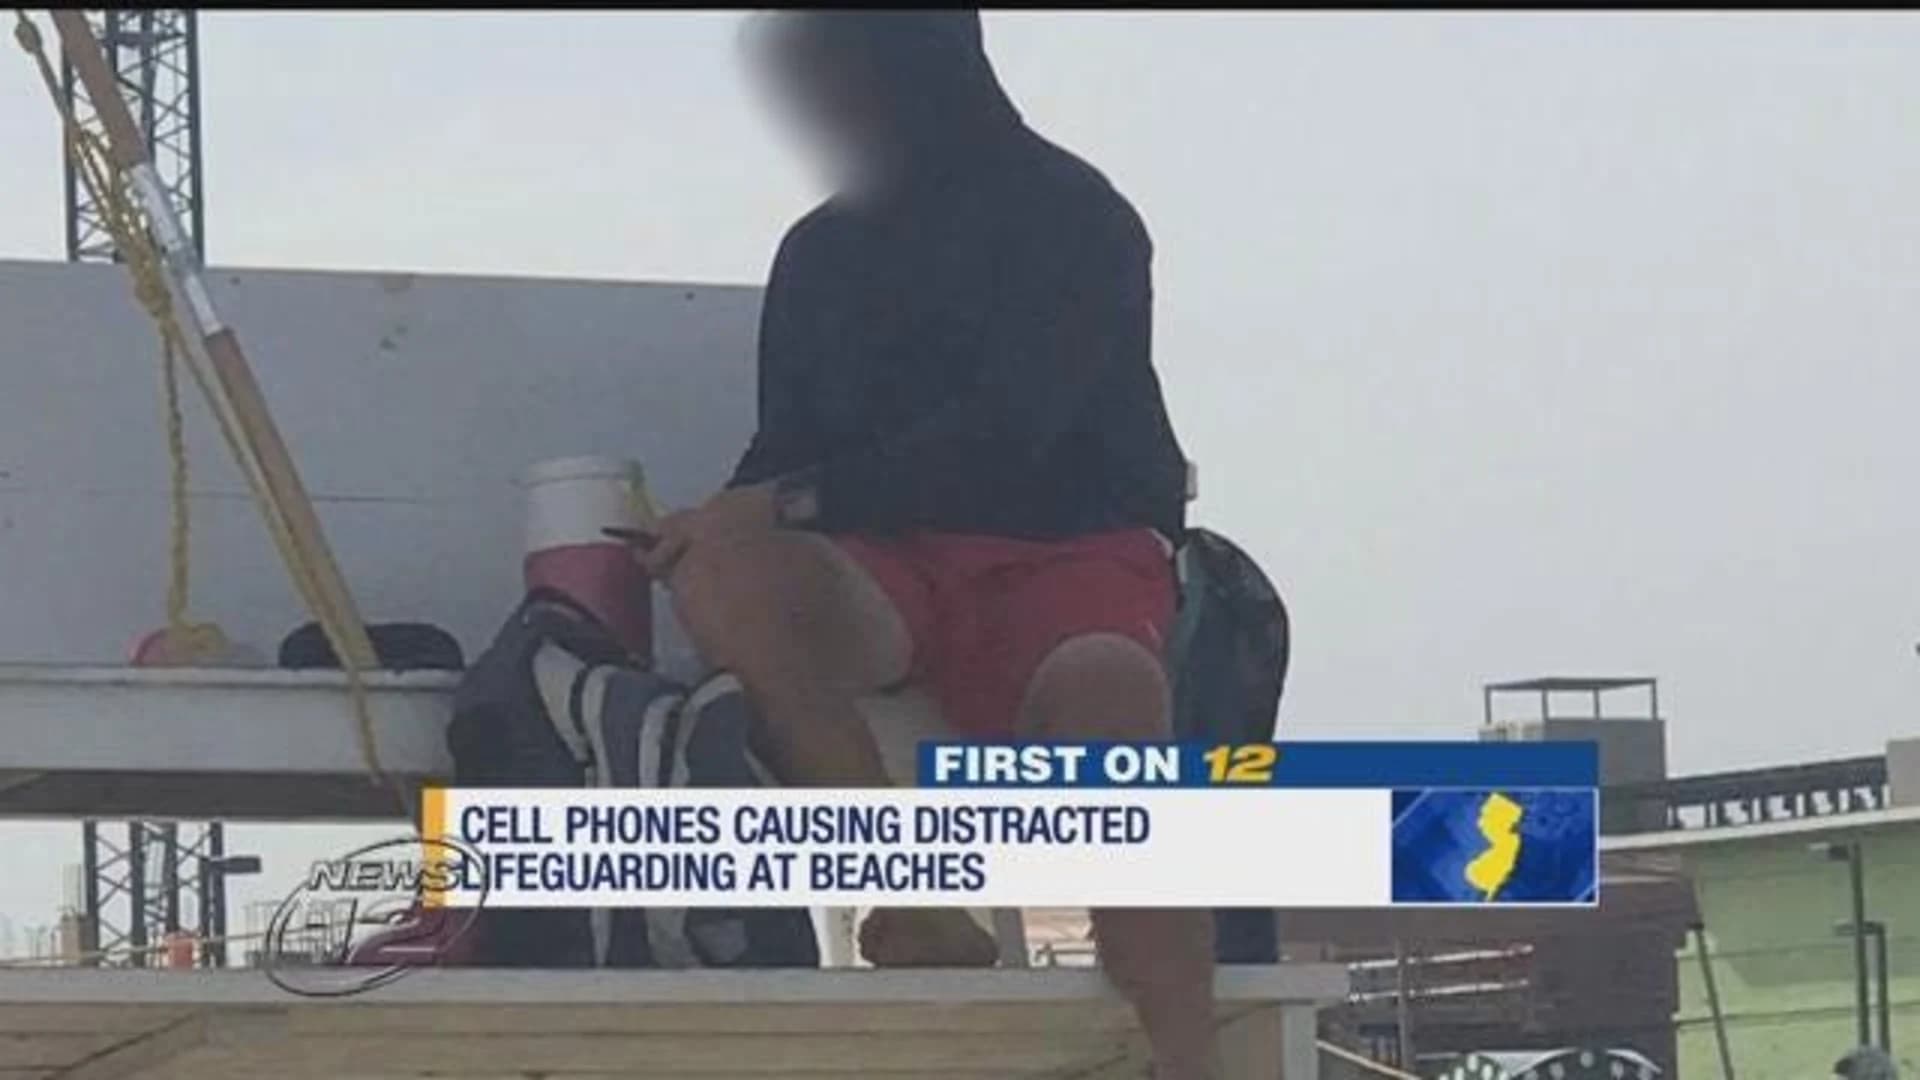 Beach lifeguard disciplined for using phone on duty